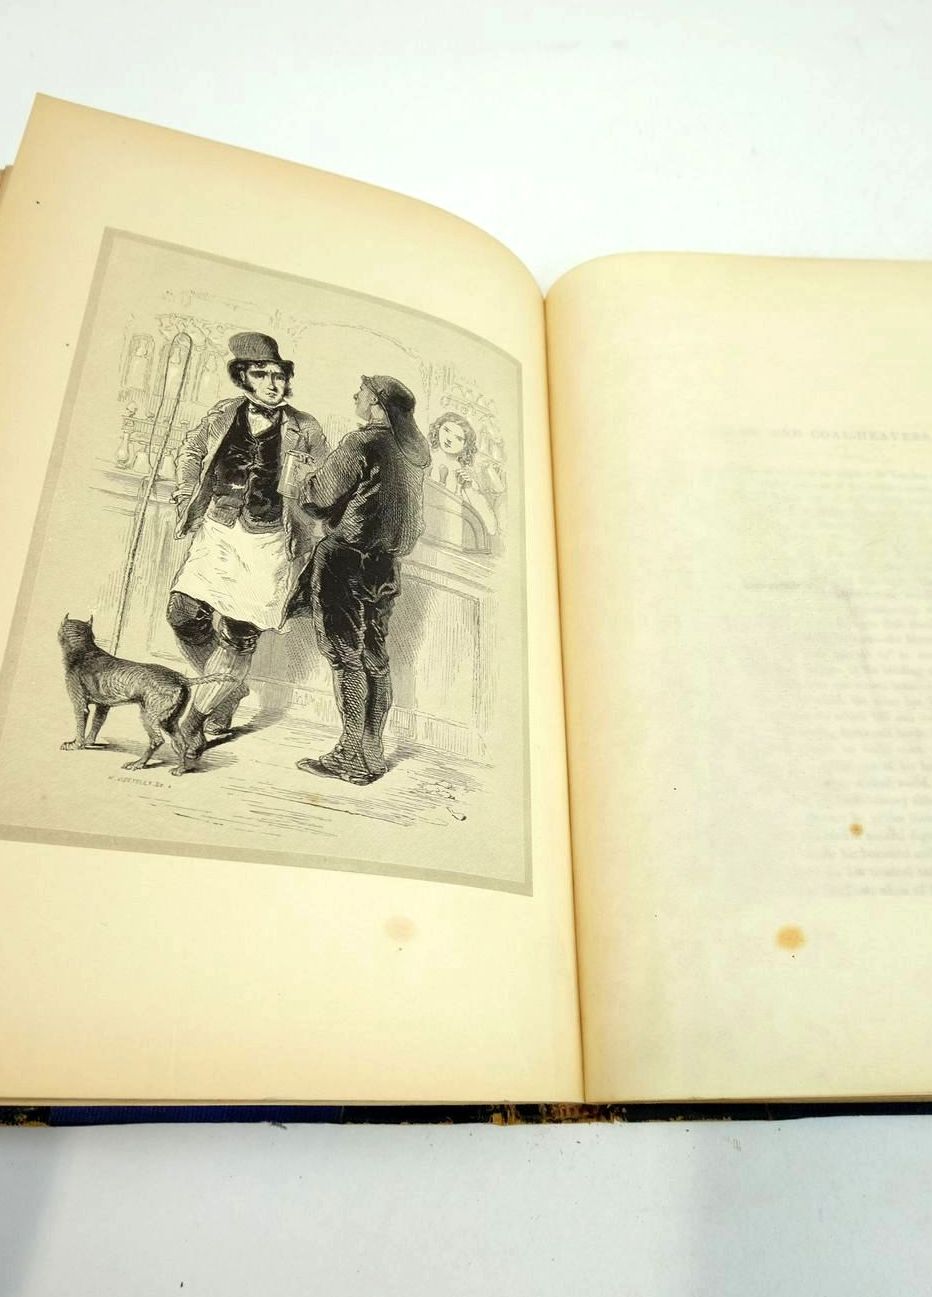 Photo of GAVARNI IN LONDON: SKETCHES OF LIFE AND CHARACTER written by Smith, Albert illustrated by Gavarni, published by David Bogue (STOCK CODE: 1821319)  for sale by Stella & Rose's Books